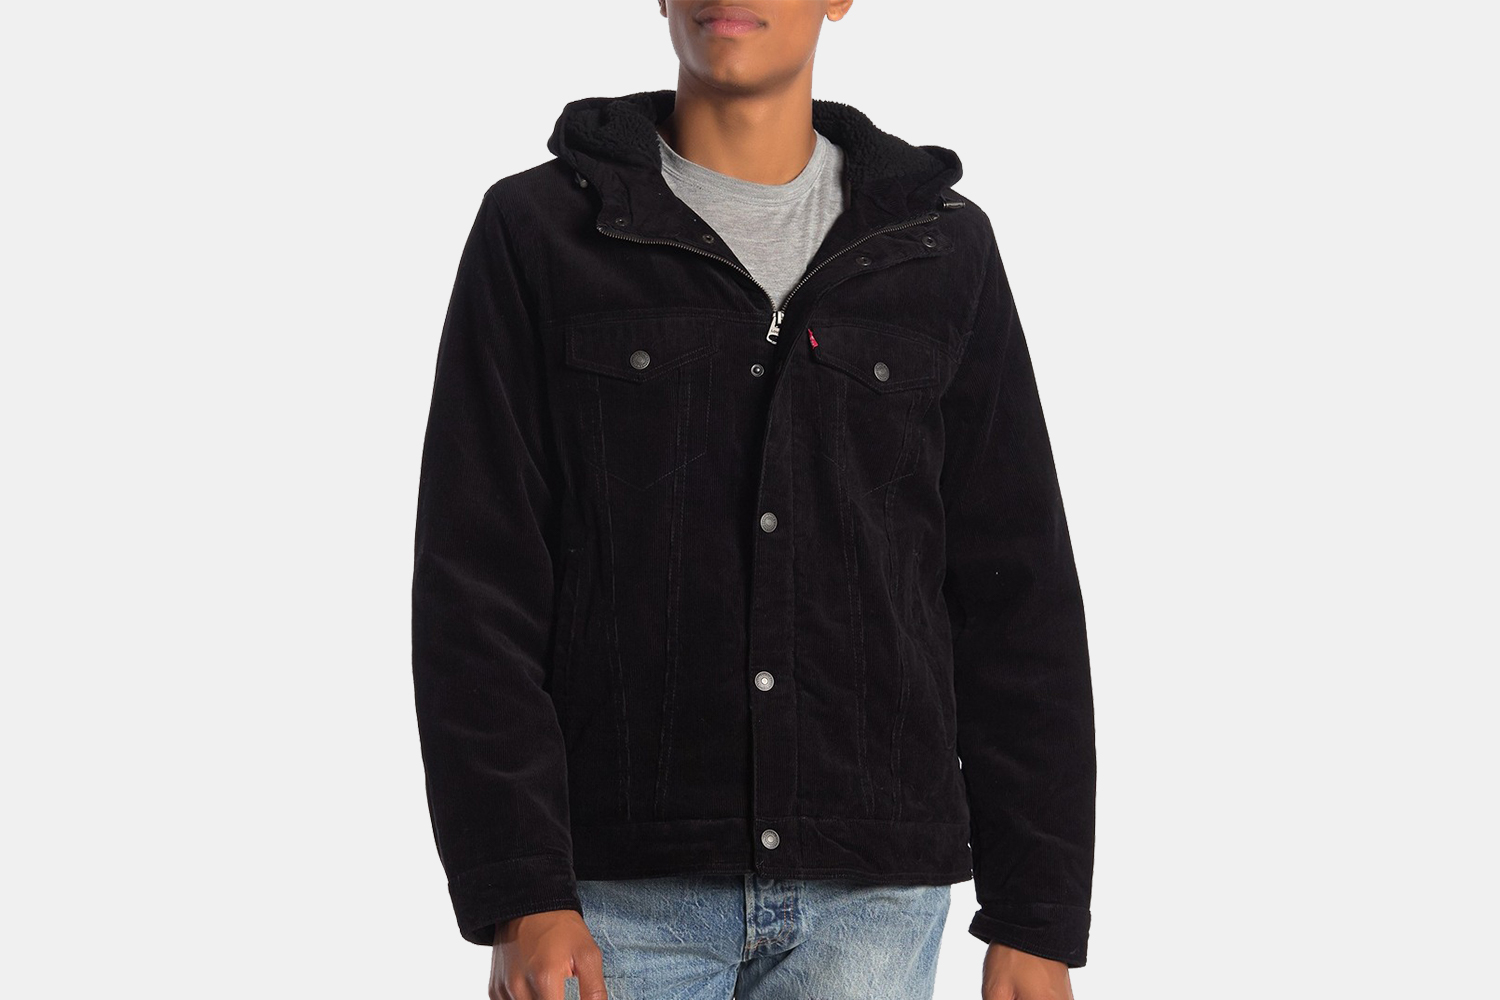 Levi's Sherpa-Lined Jackets Are 60% Off at Nordstrom Rack - InsideHook